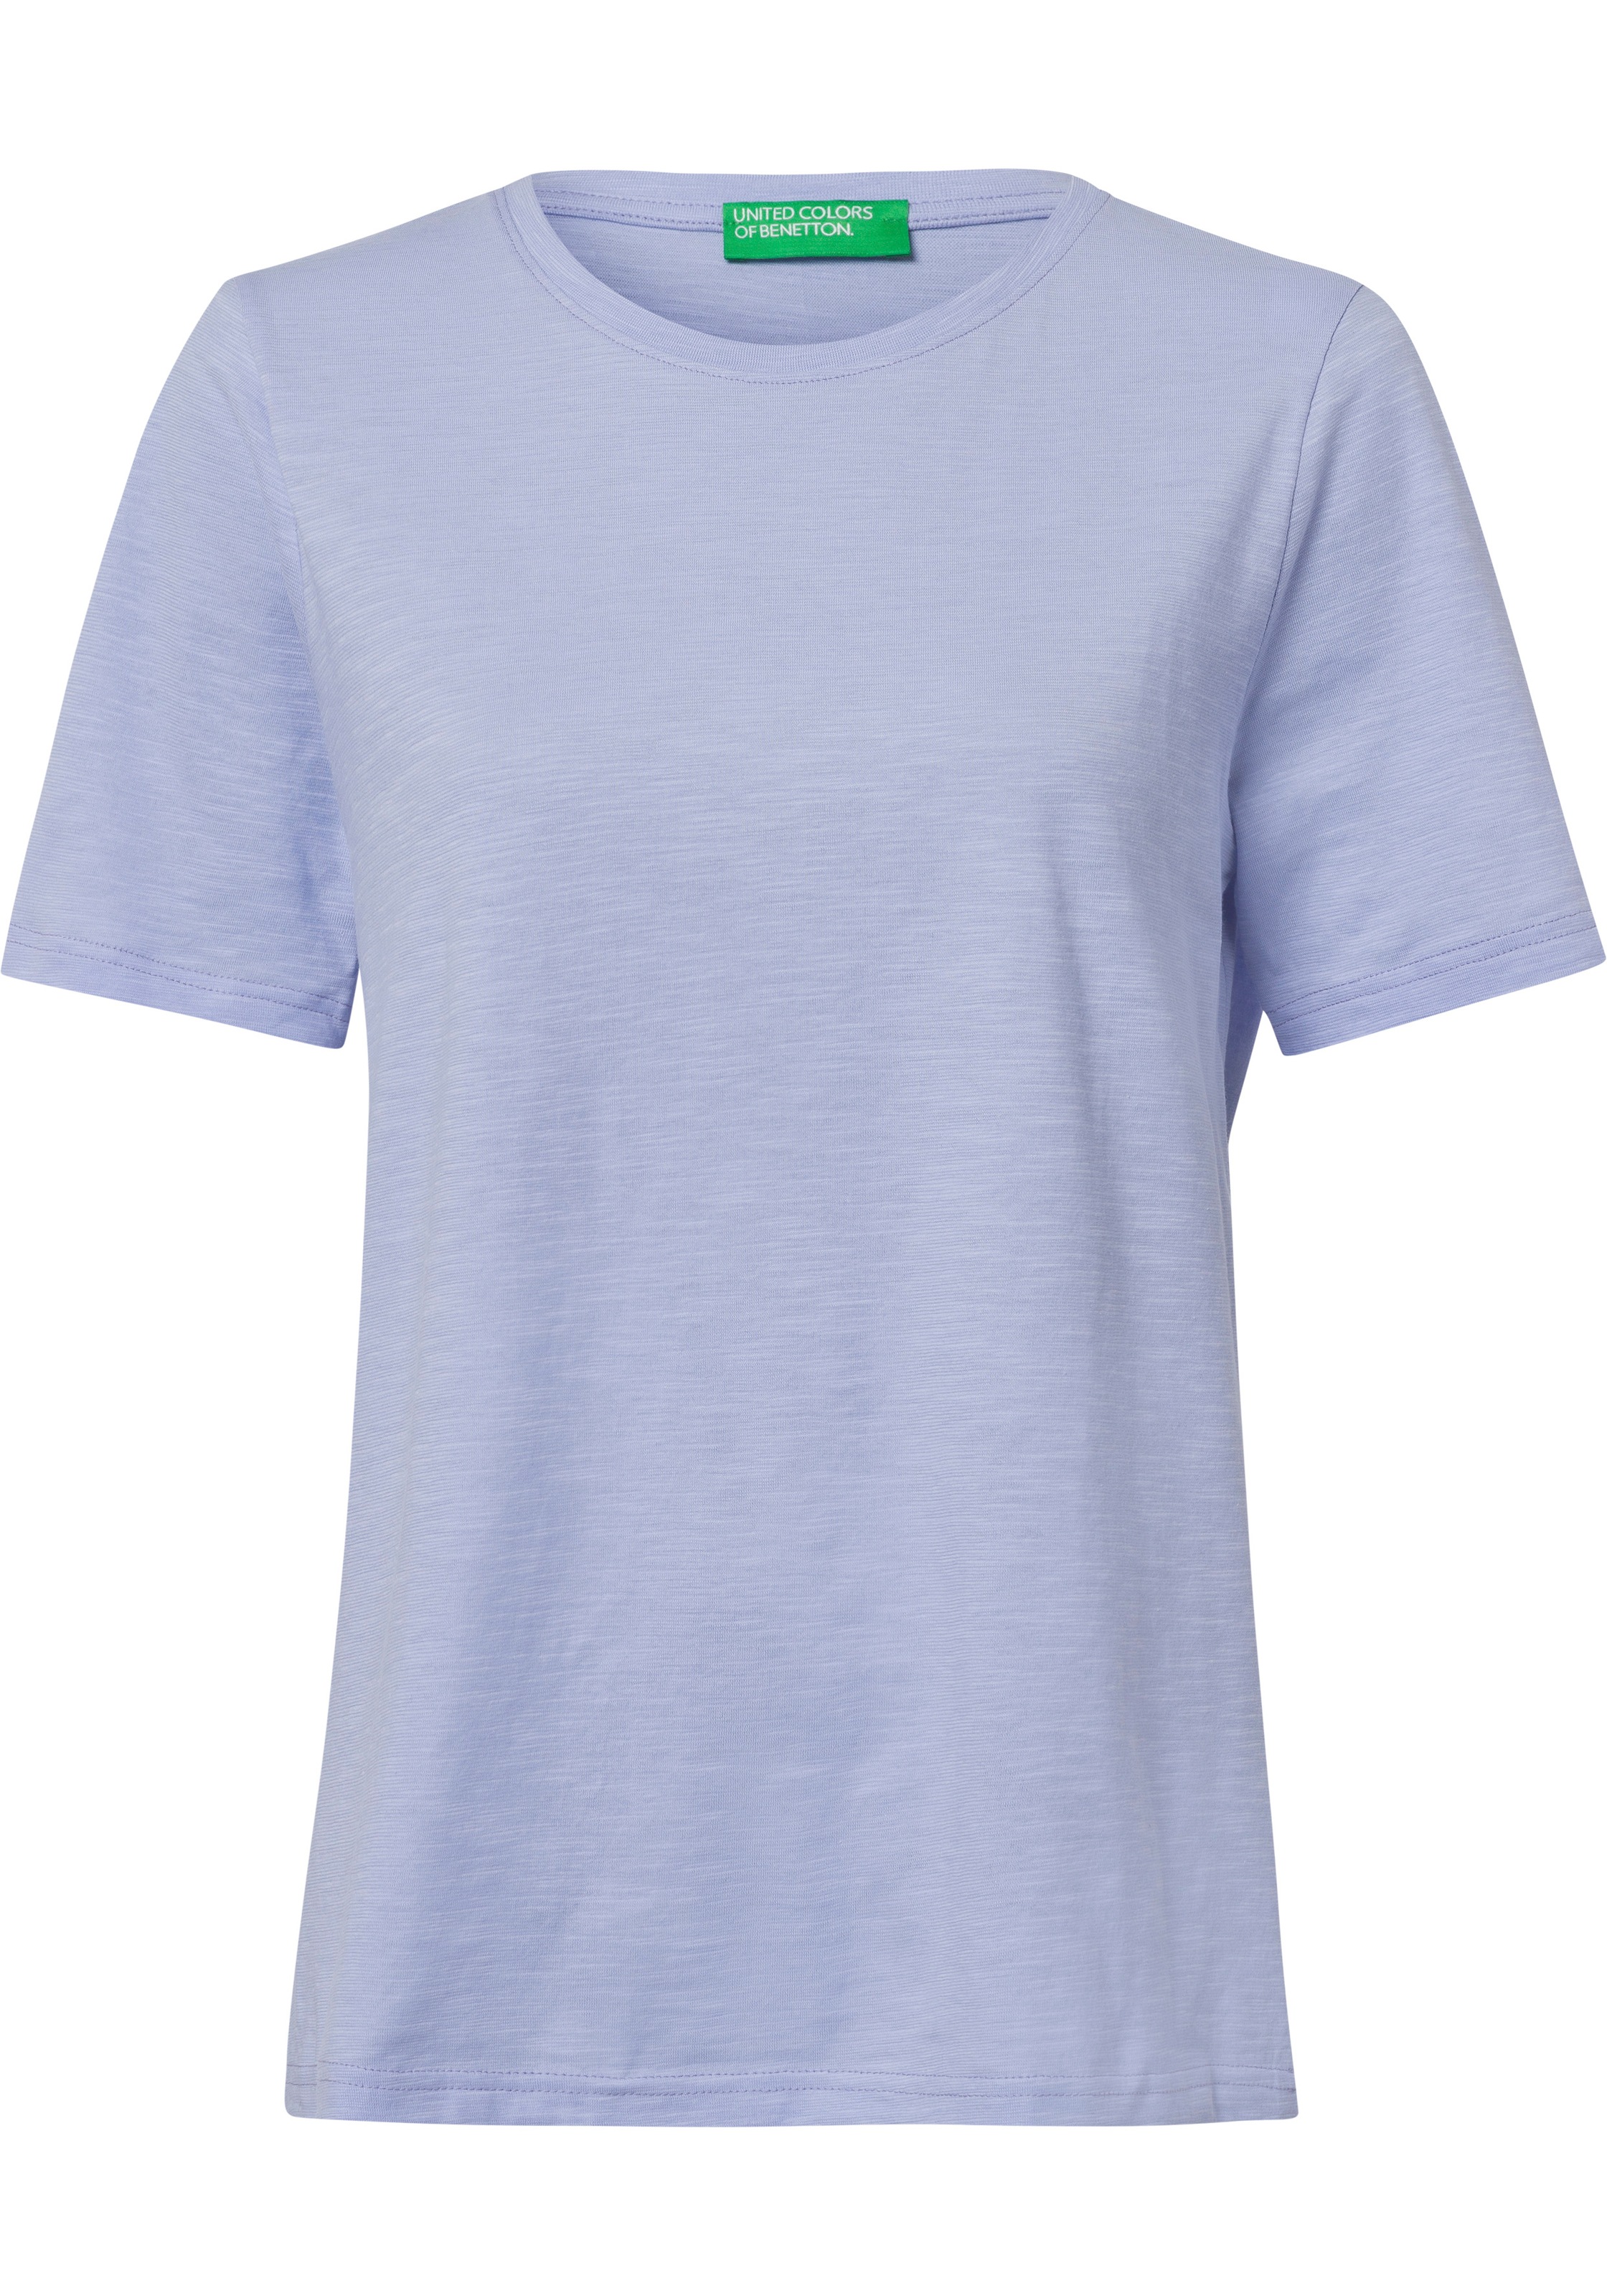 T-Shirt, Benetton cleaner of Colors in bei ♕ Basic-Optik United